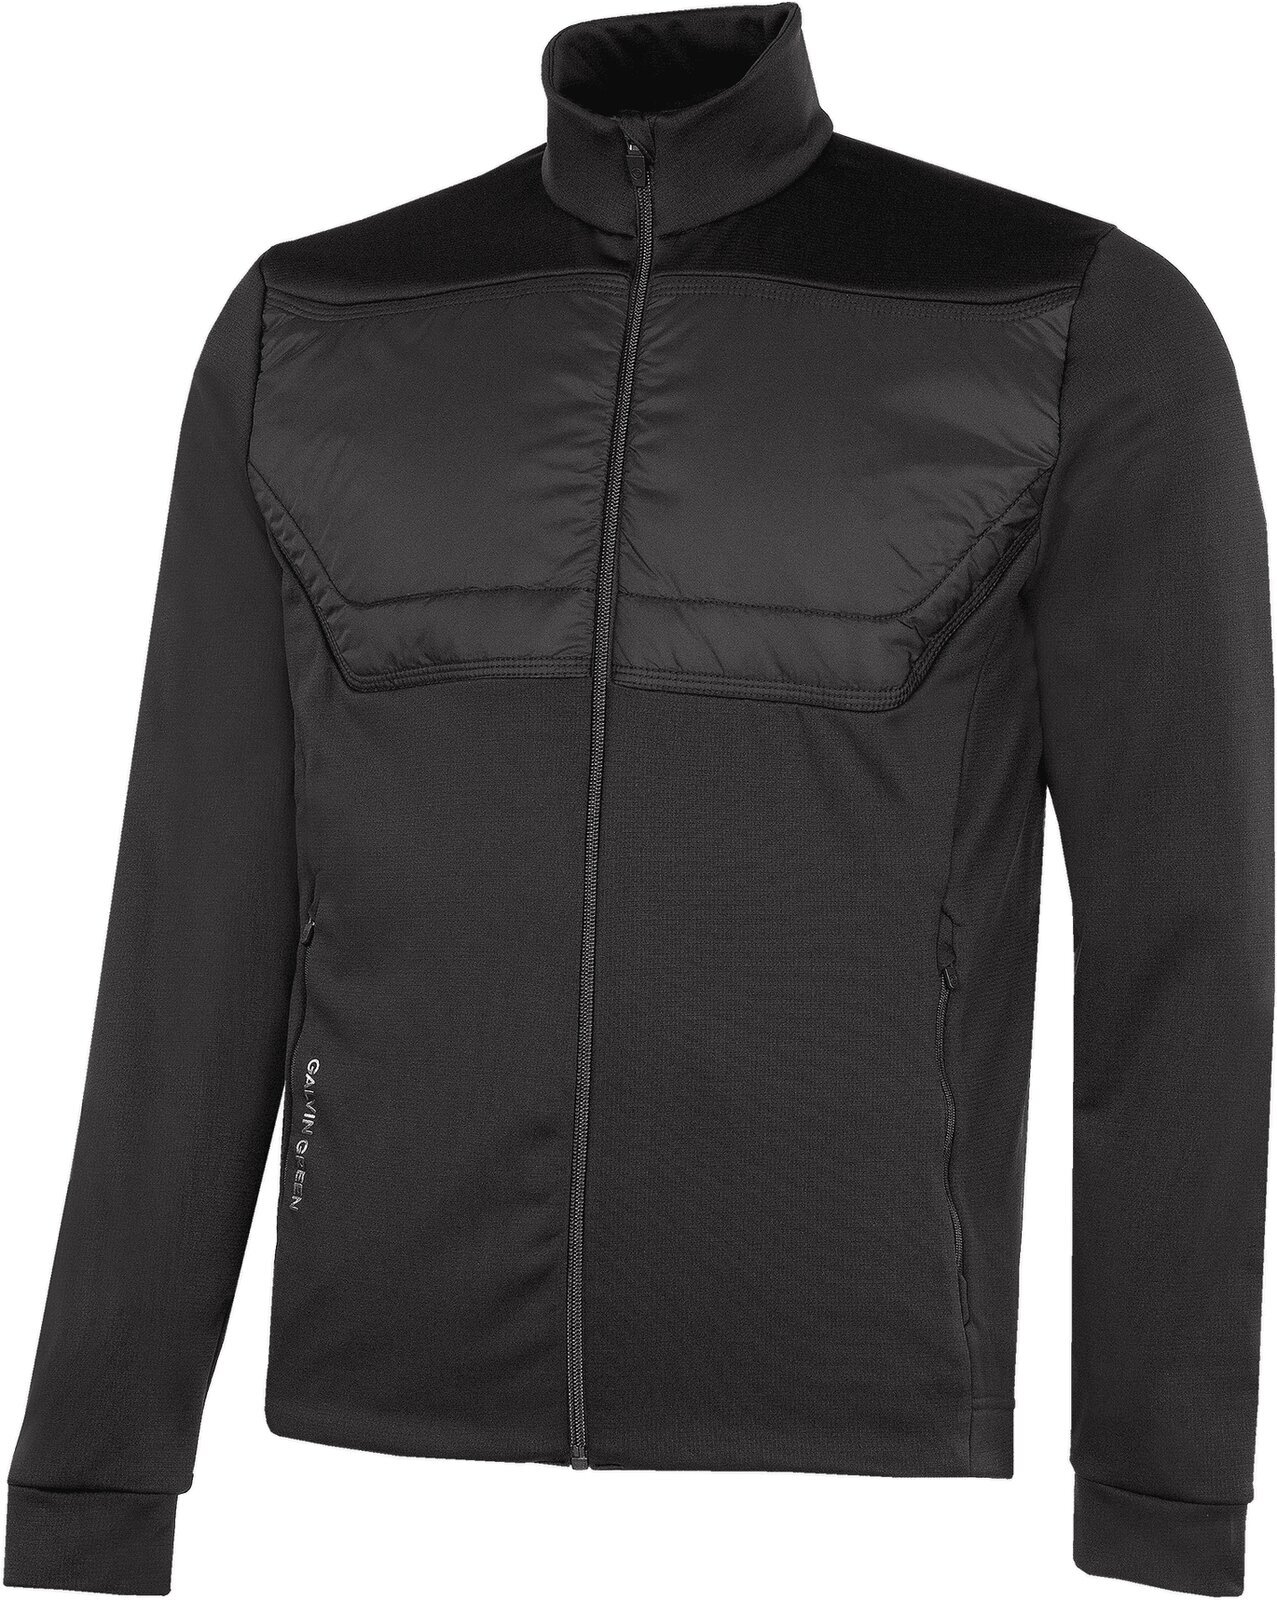 Jacket Galvin Green Dylan Mens Insulating Mid Layer Black XL